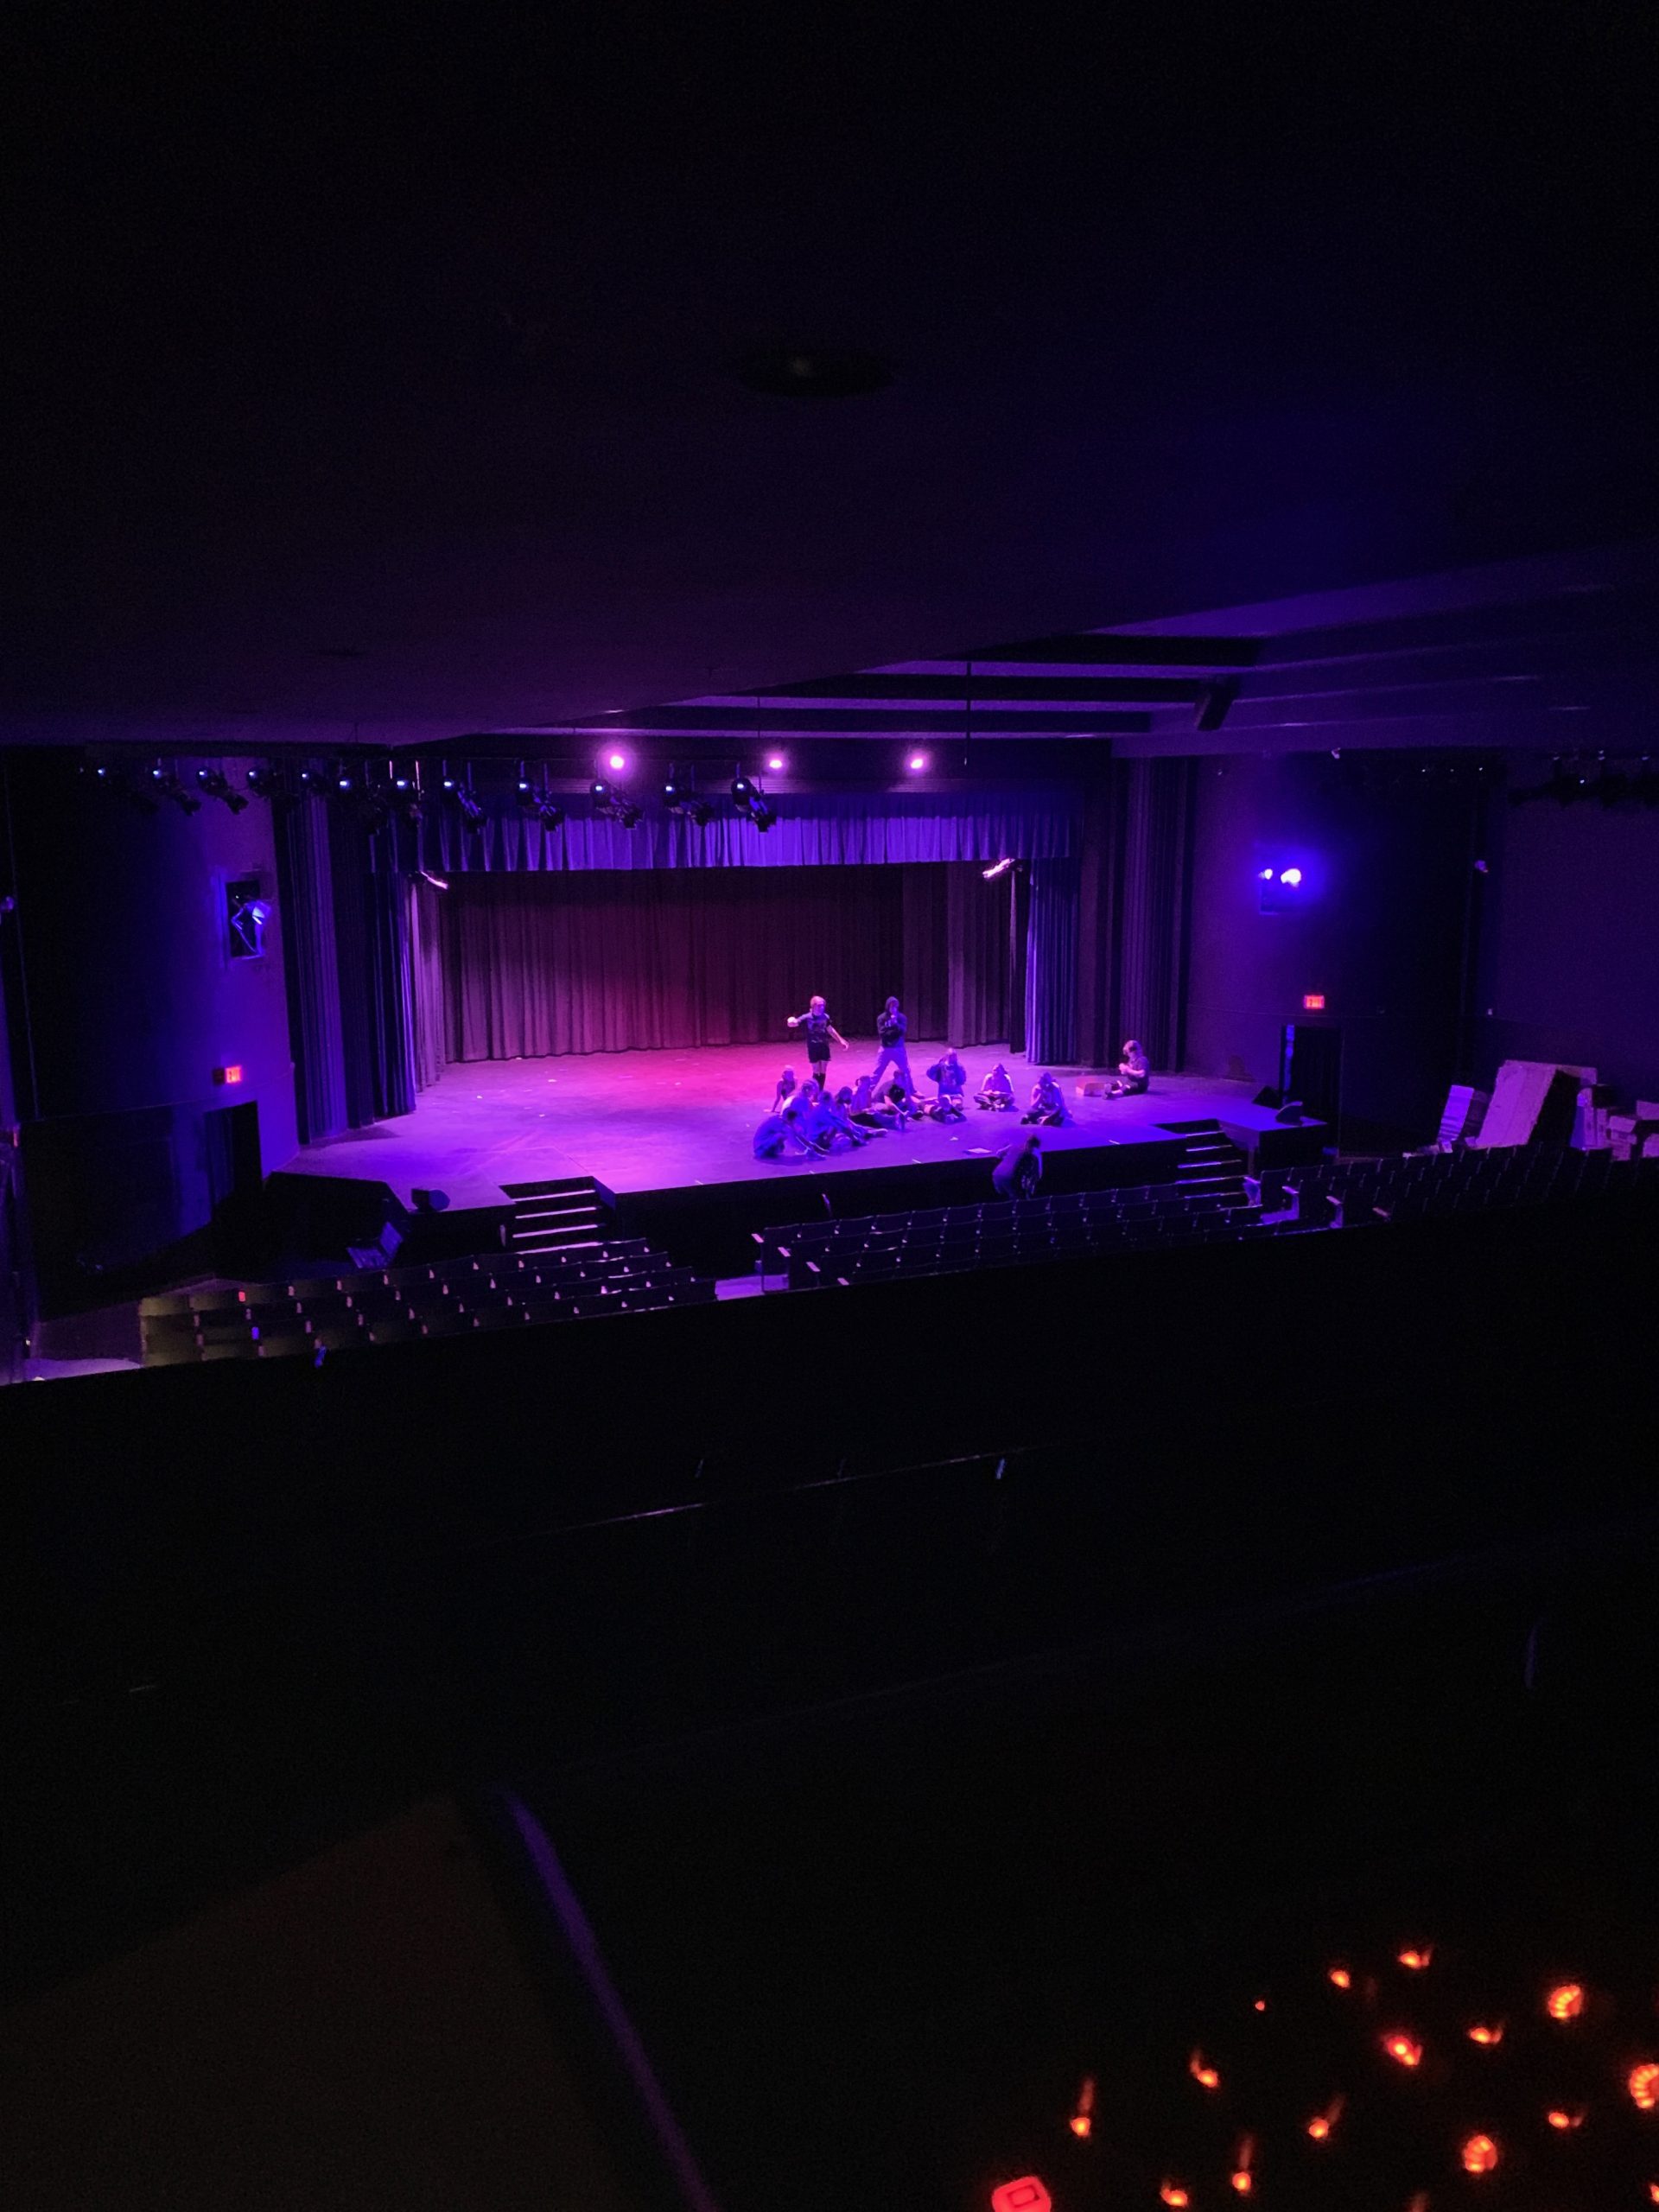 Photo taken from the electrical booth in the Beeler auditorium on September 19th, during a Carboard Stories tech rehearsal.